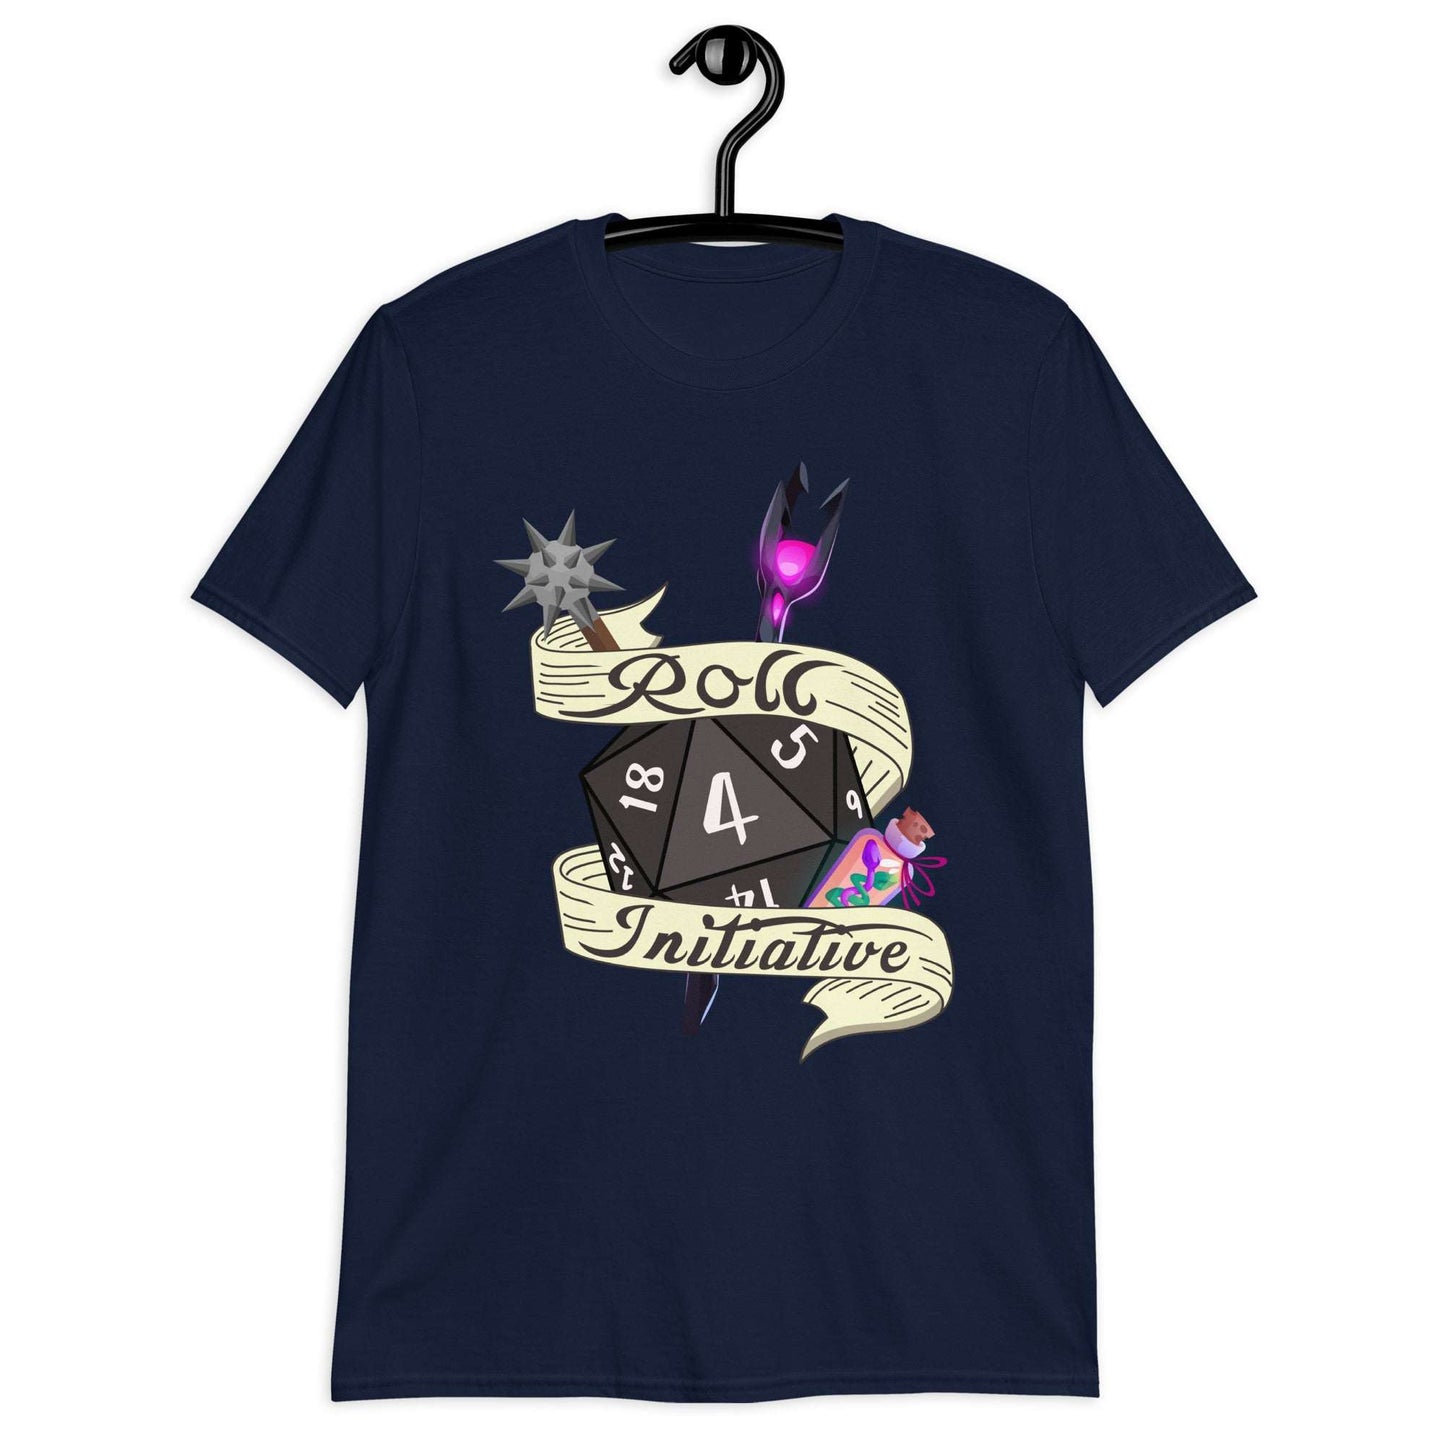 Roll for Initiative, D20 RPG T Shirt. Ideal as gift for role play gamers